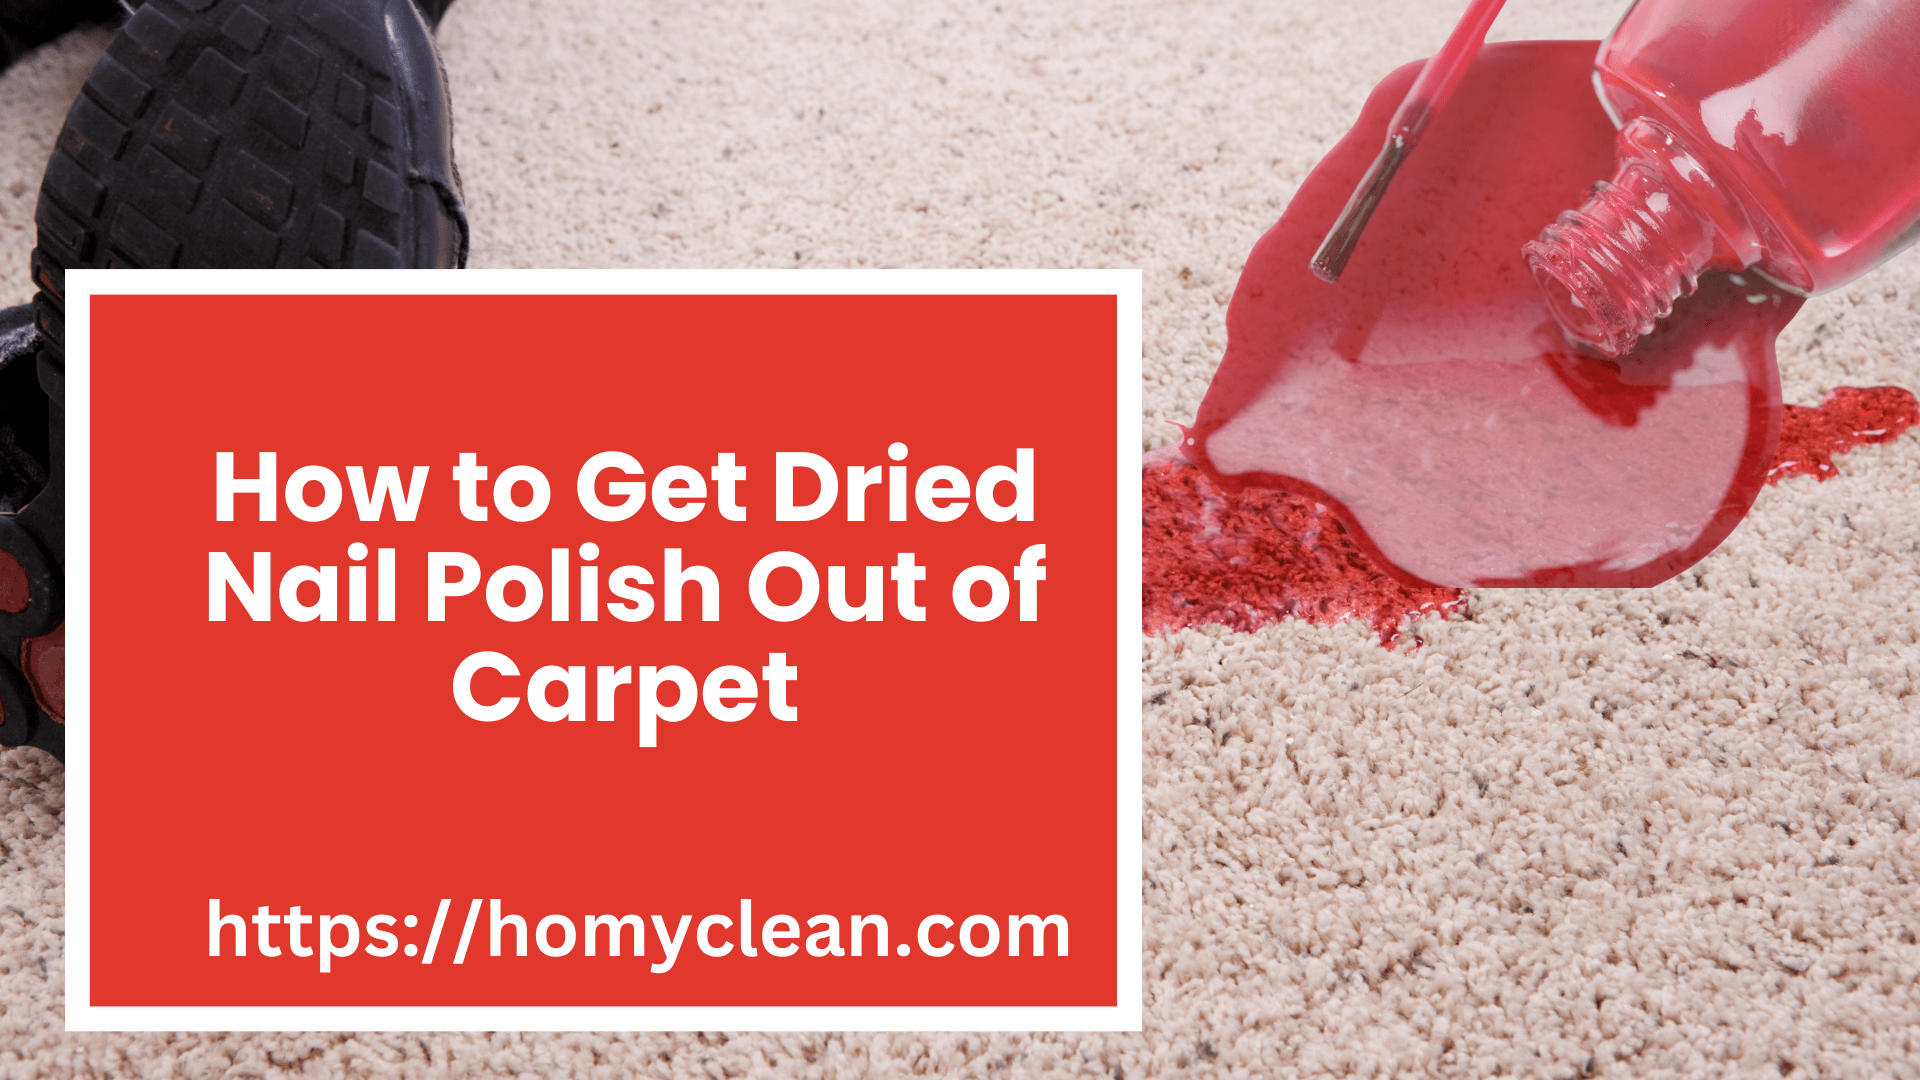 7 Methods How to Get Dried Nail Polish Out of Carpet